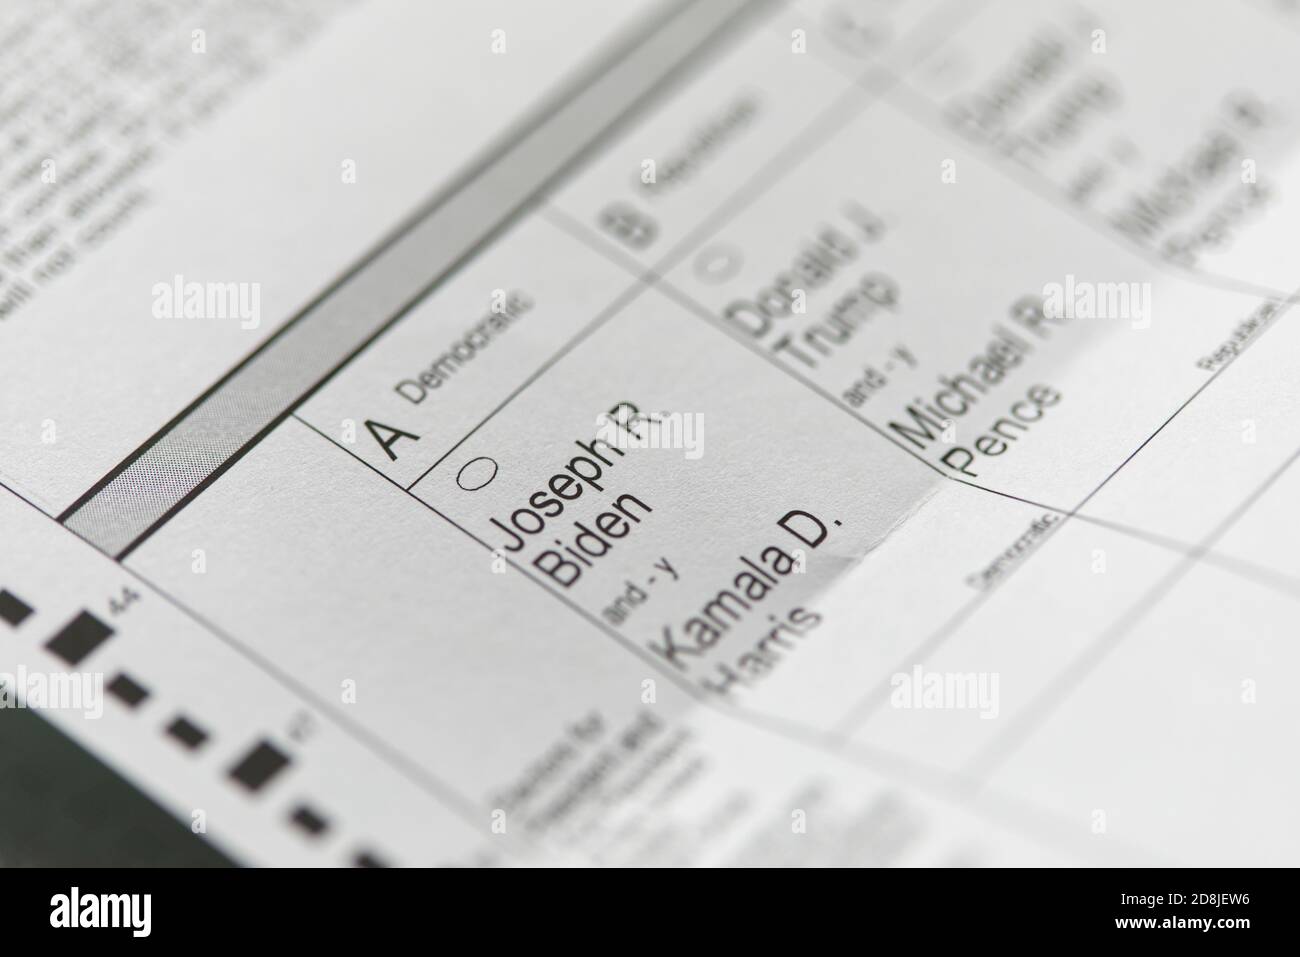 Close-up view of a New-York State absentee ballot for the 2020 Presidential elections, Friday October 30th, 2020, New York City, NY USA. Stock Photo